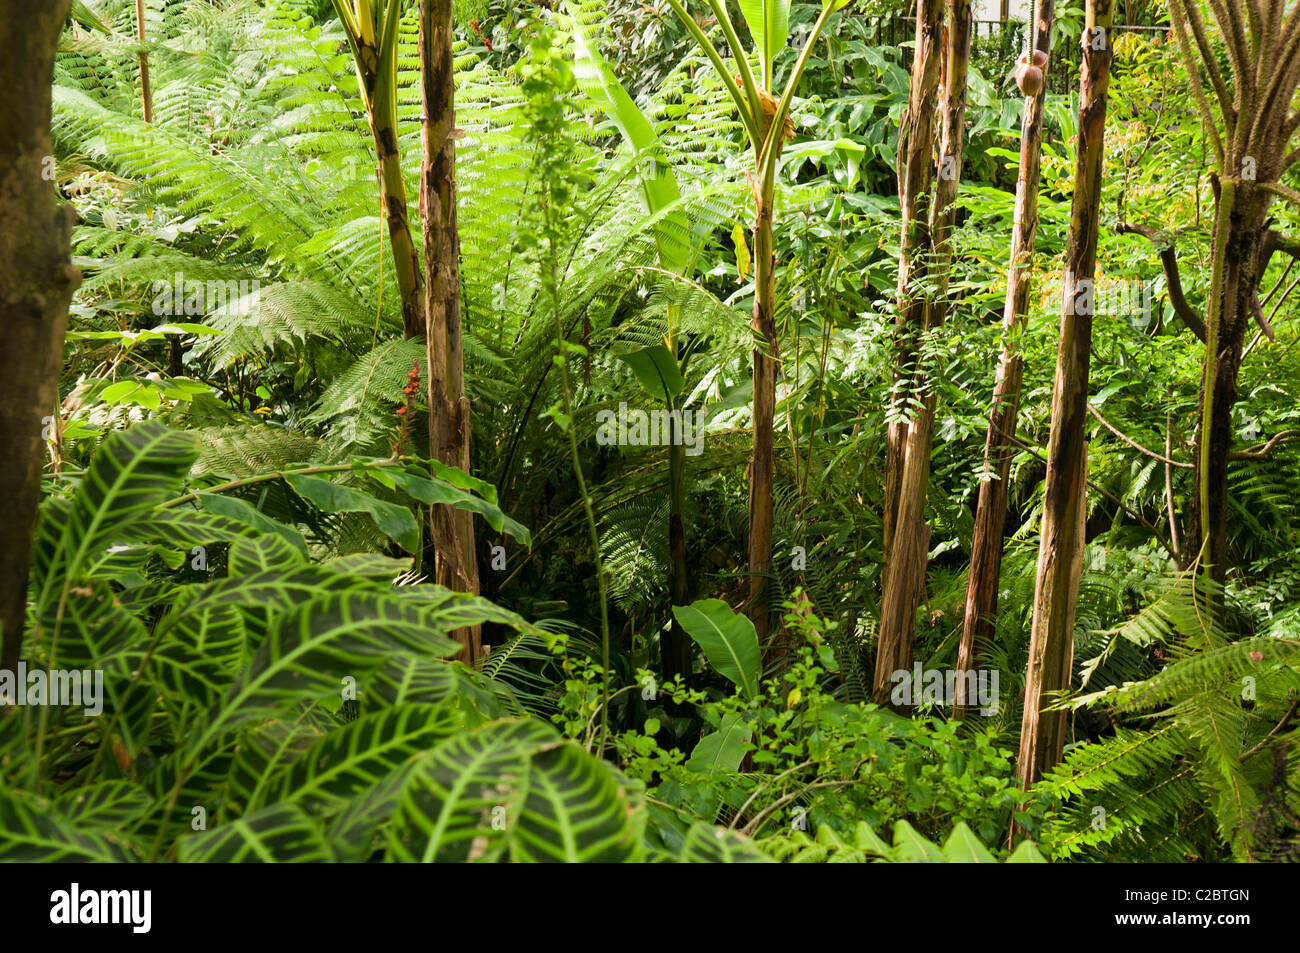 Dense jungle foliage in an indoor rainforest Stock Photo